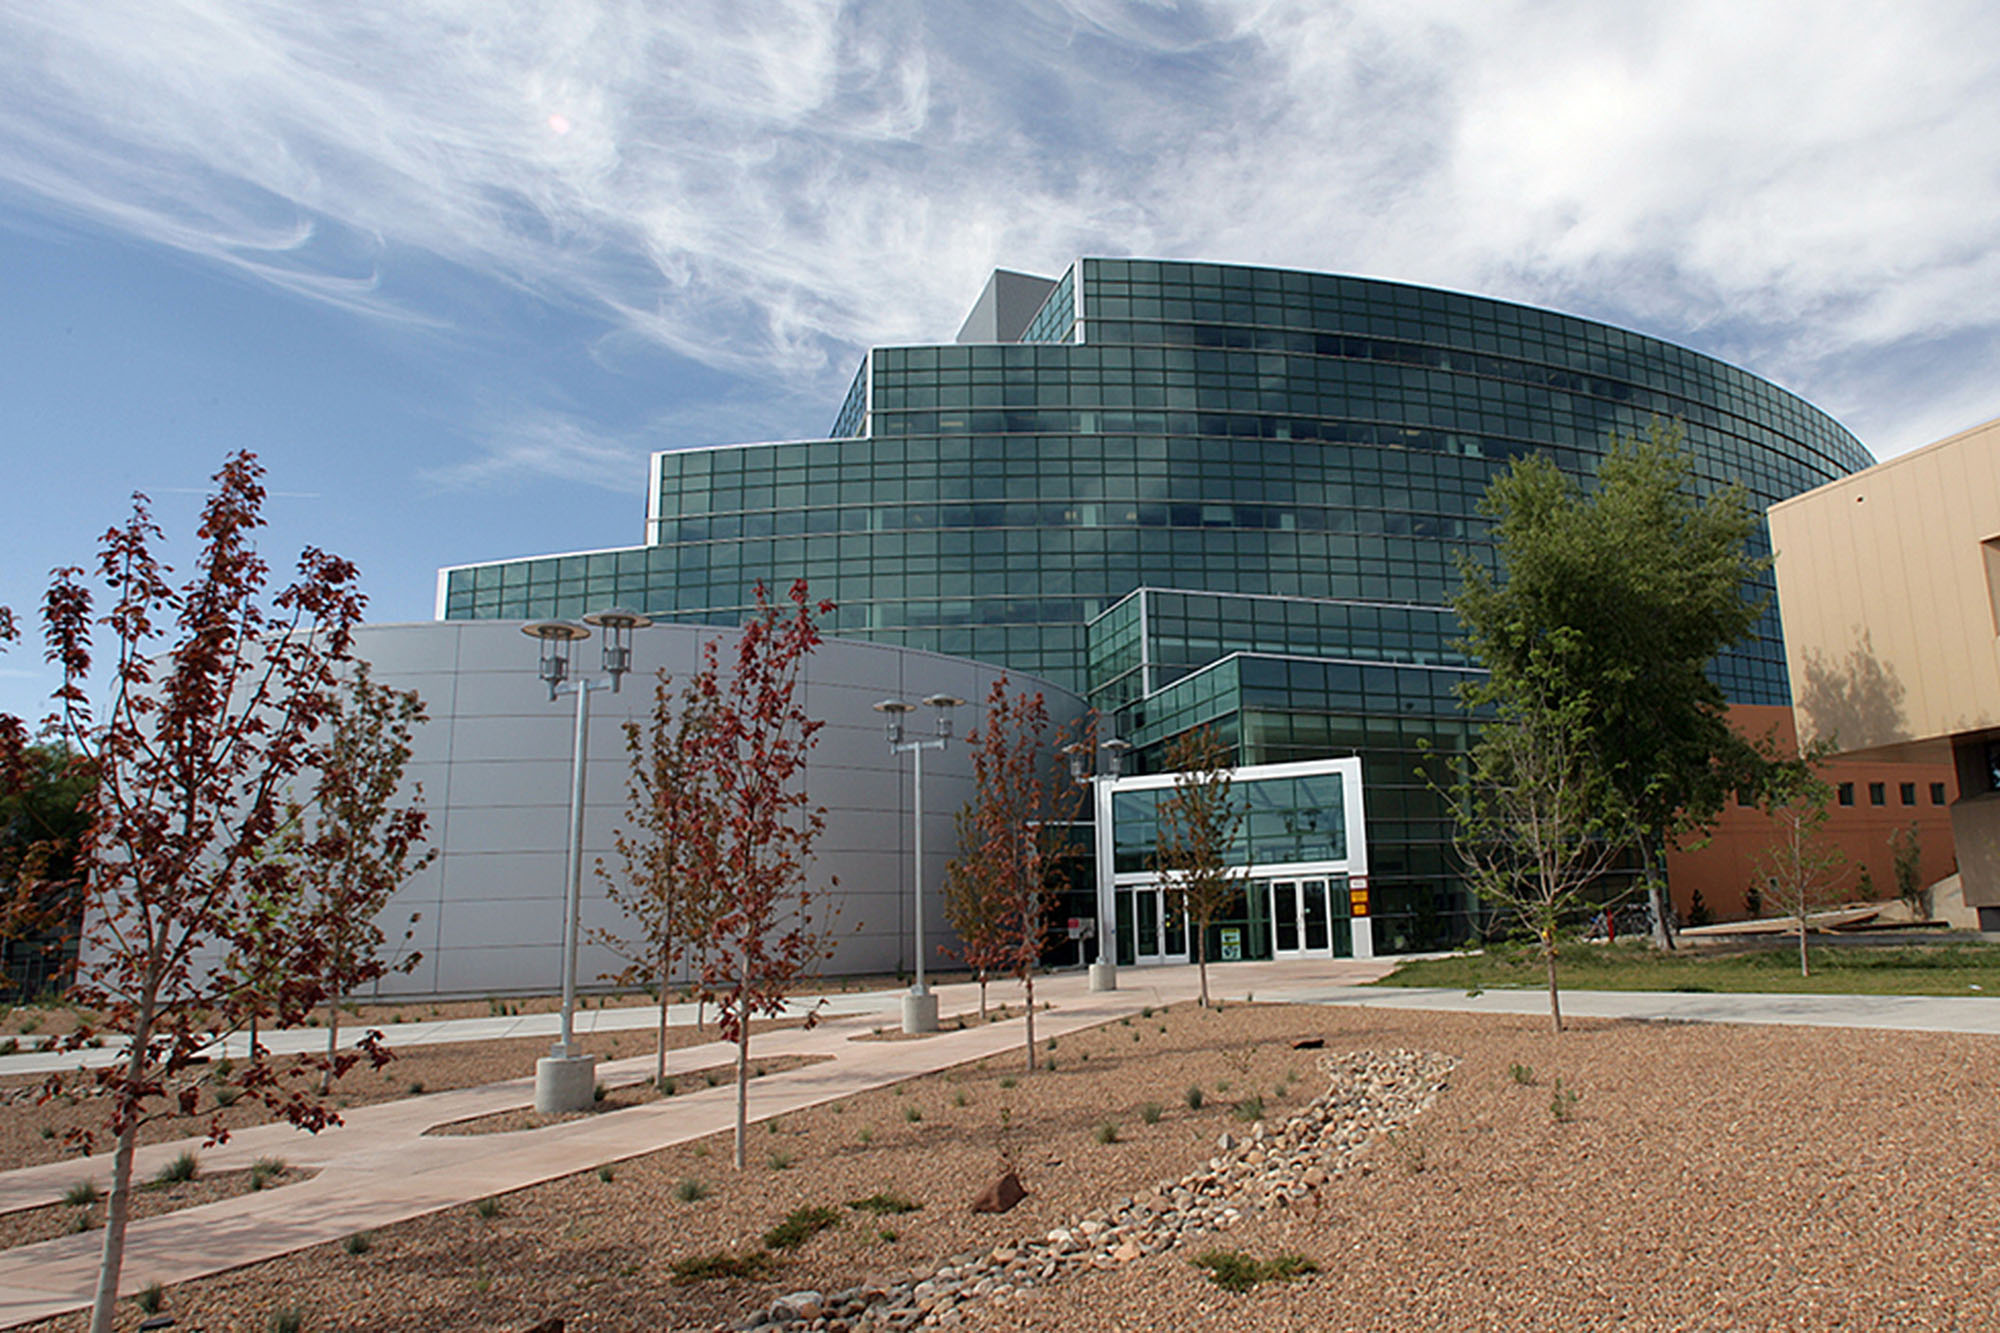 The National Nuclear Security Building at the Los Alamos National Laboratory in Los Alamos, New Mexico. It is mostly glass and has a curved, stepped shape, about 5 floors high.